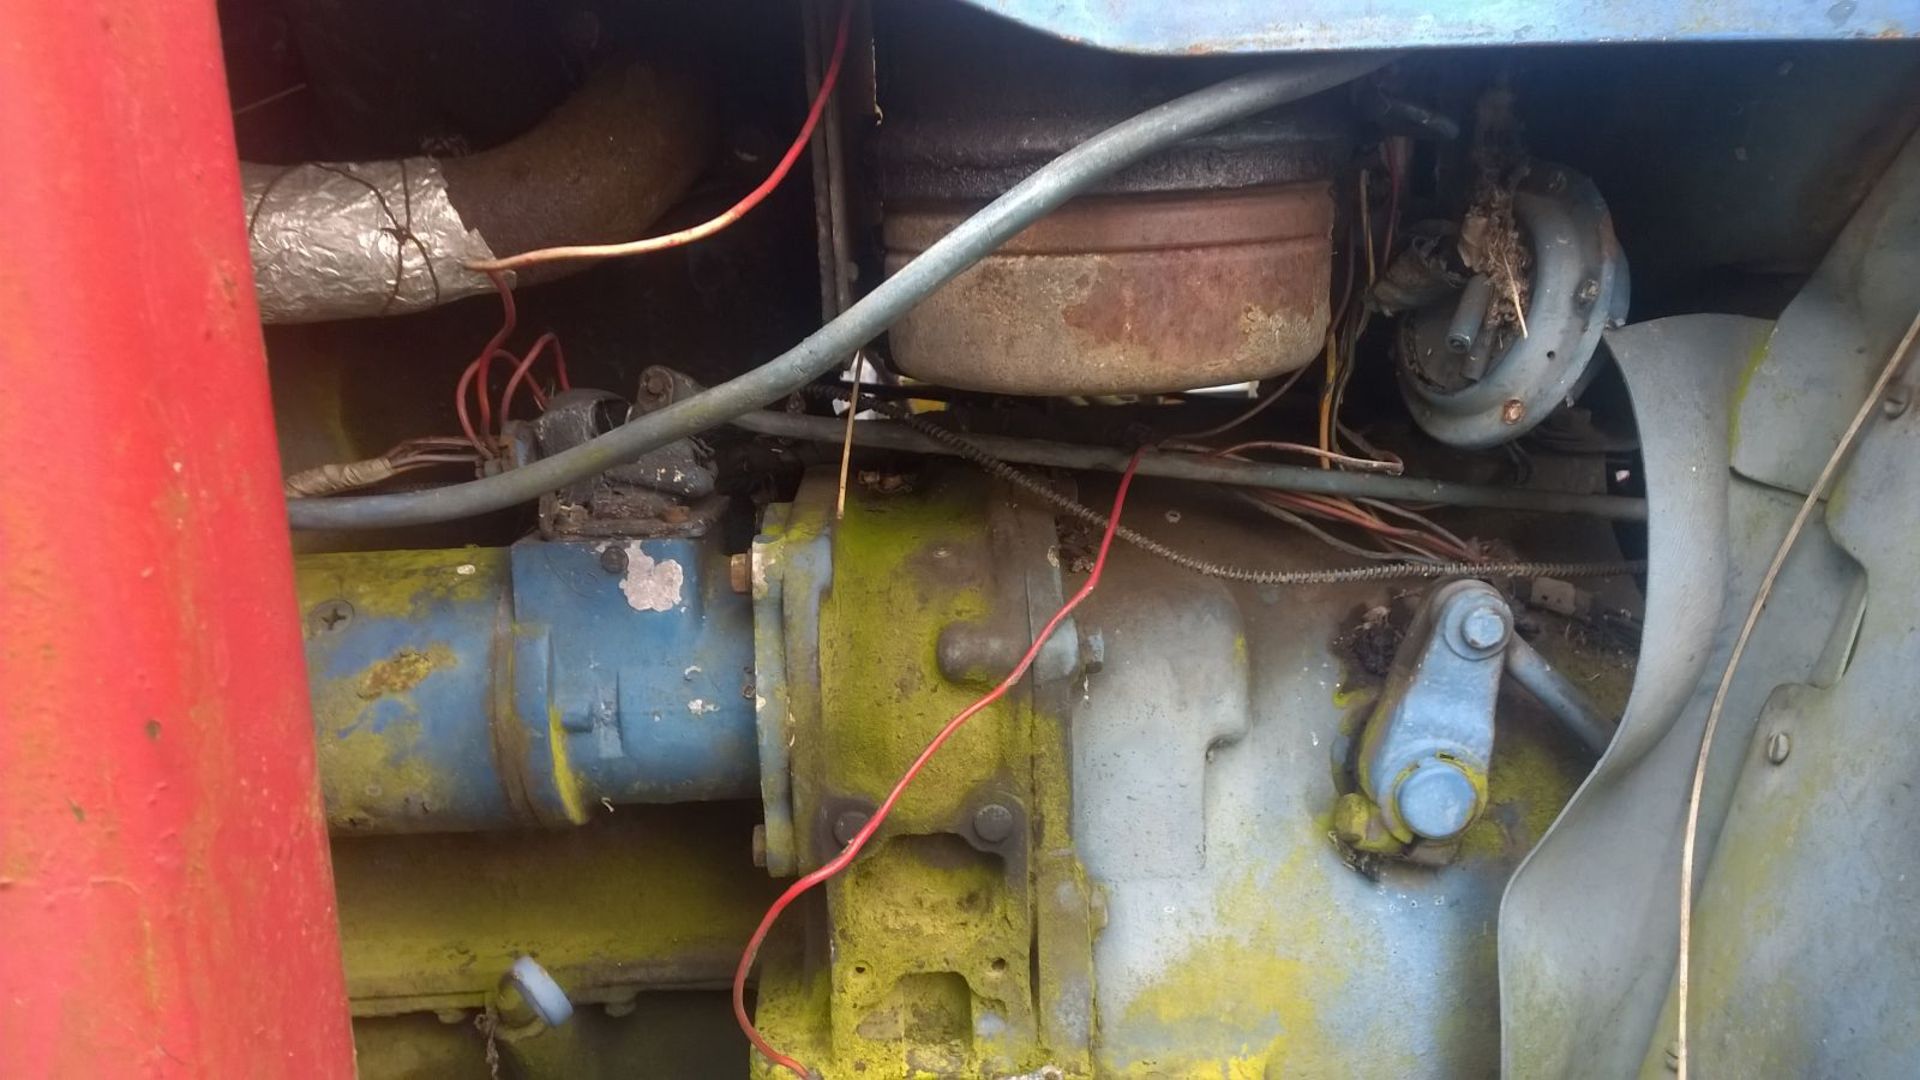 FORDSON  SUPER MAJOR c/w POWER LOADER   WE HAVENT HEARD IT RUNNING YET BUT WE ARE INTENDING TO GET - Image 7 of 20